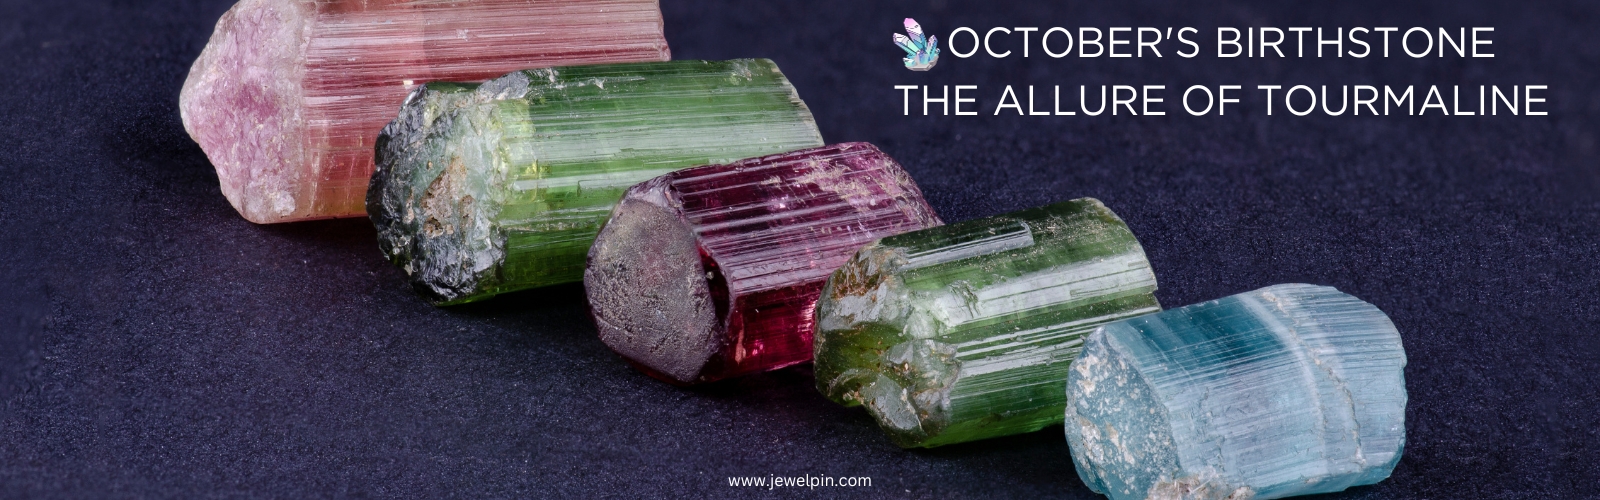 October's Birthstone - The Allure of Tourmaline